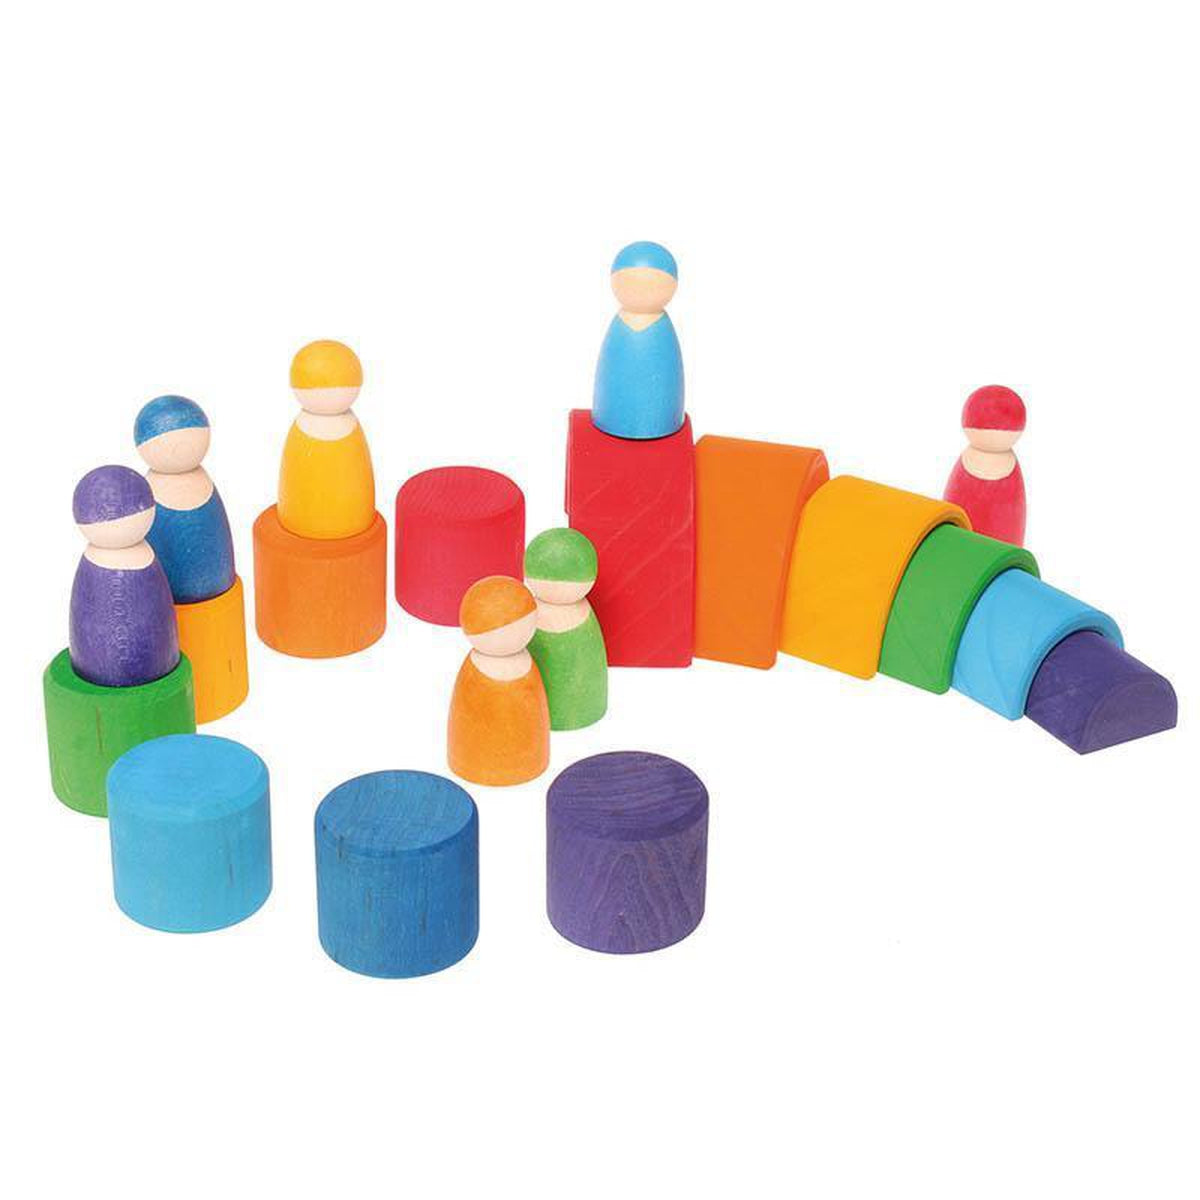 Grimm's 7 friends including bowls-blocks & building sets-Fire the Imagination-Dilly Dally Kids